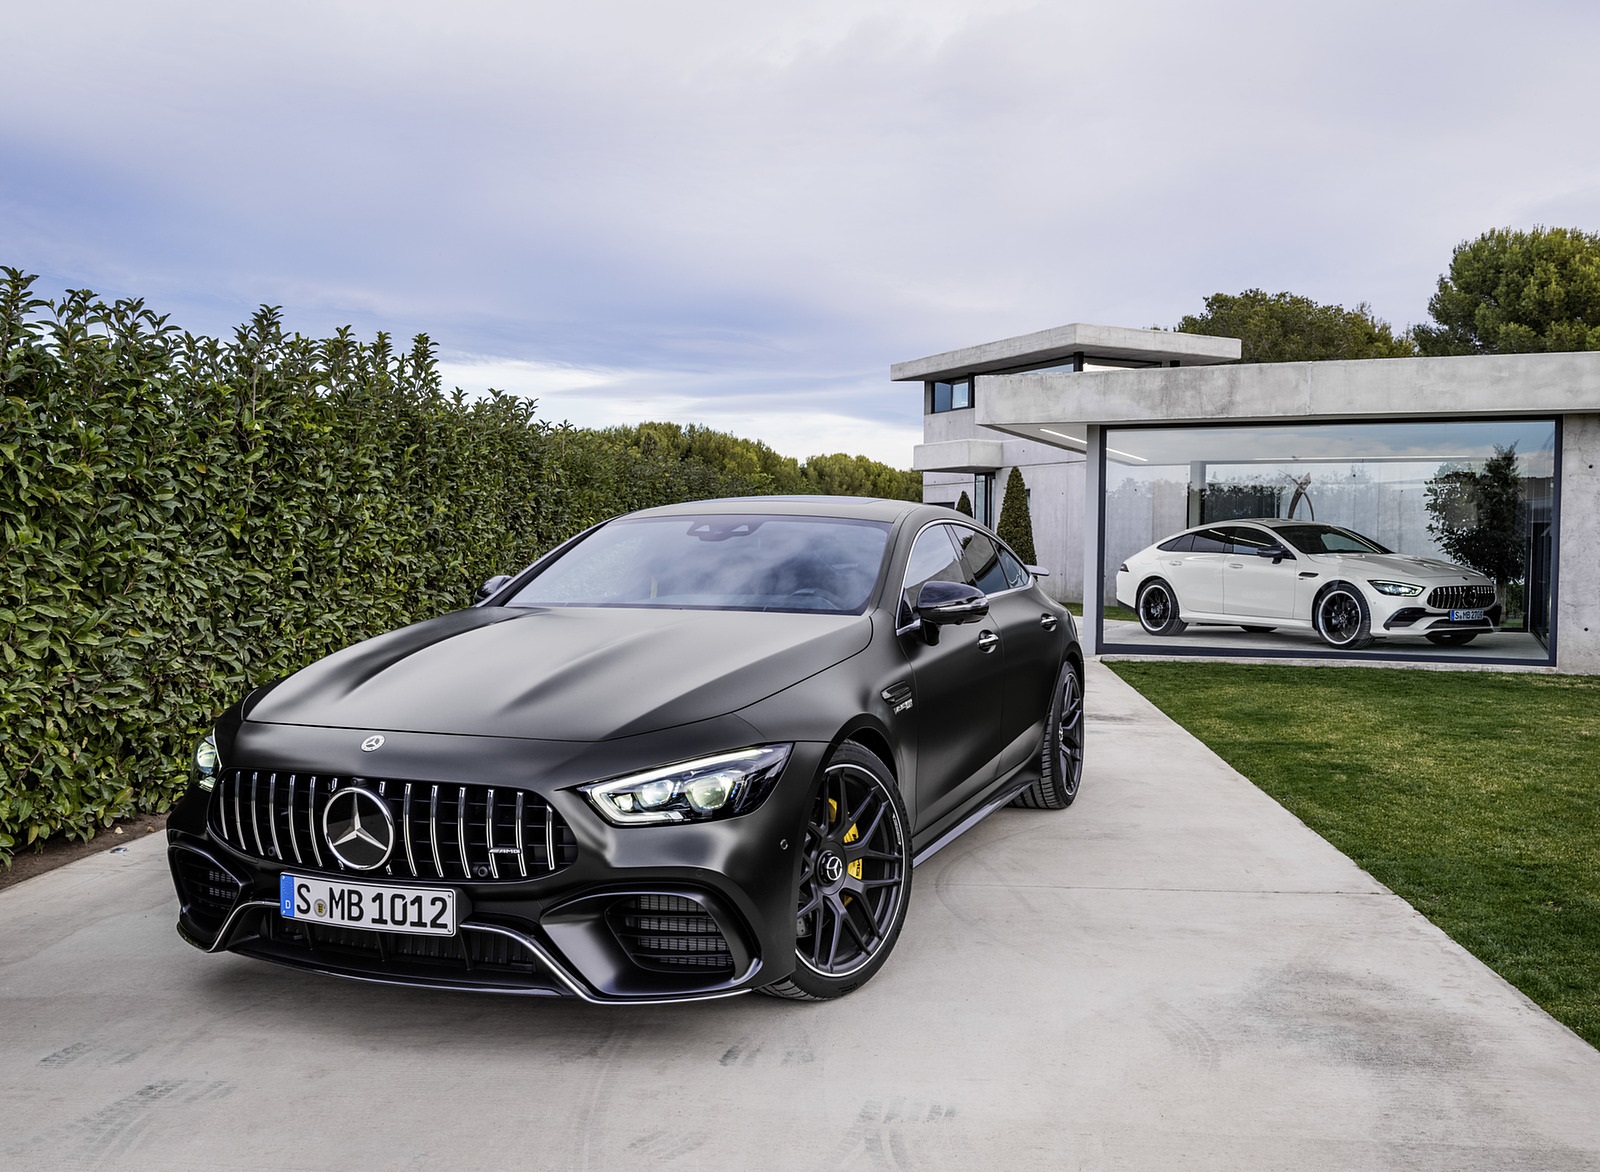 Mercedes Benz Car Vehicle Luxury Cars Mercedes AMG GT 4 Door Front Angle View Black Cars 1600x1172